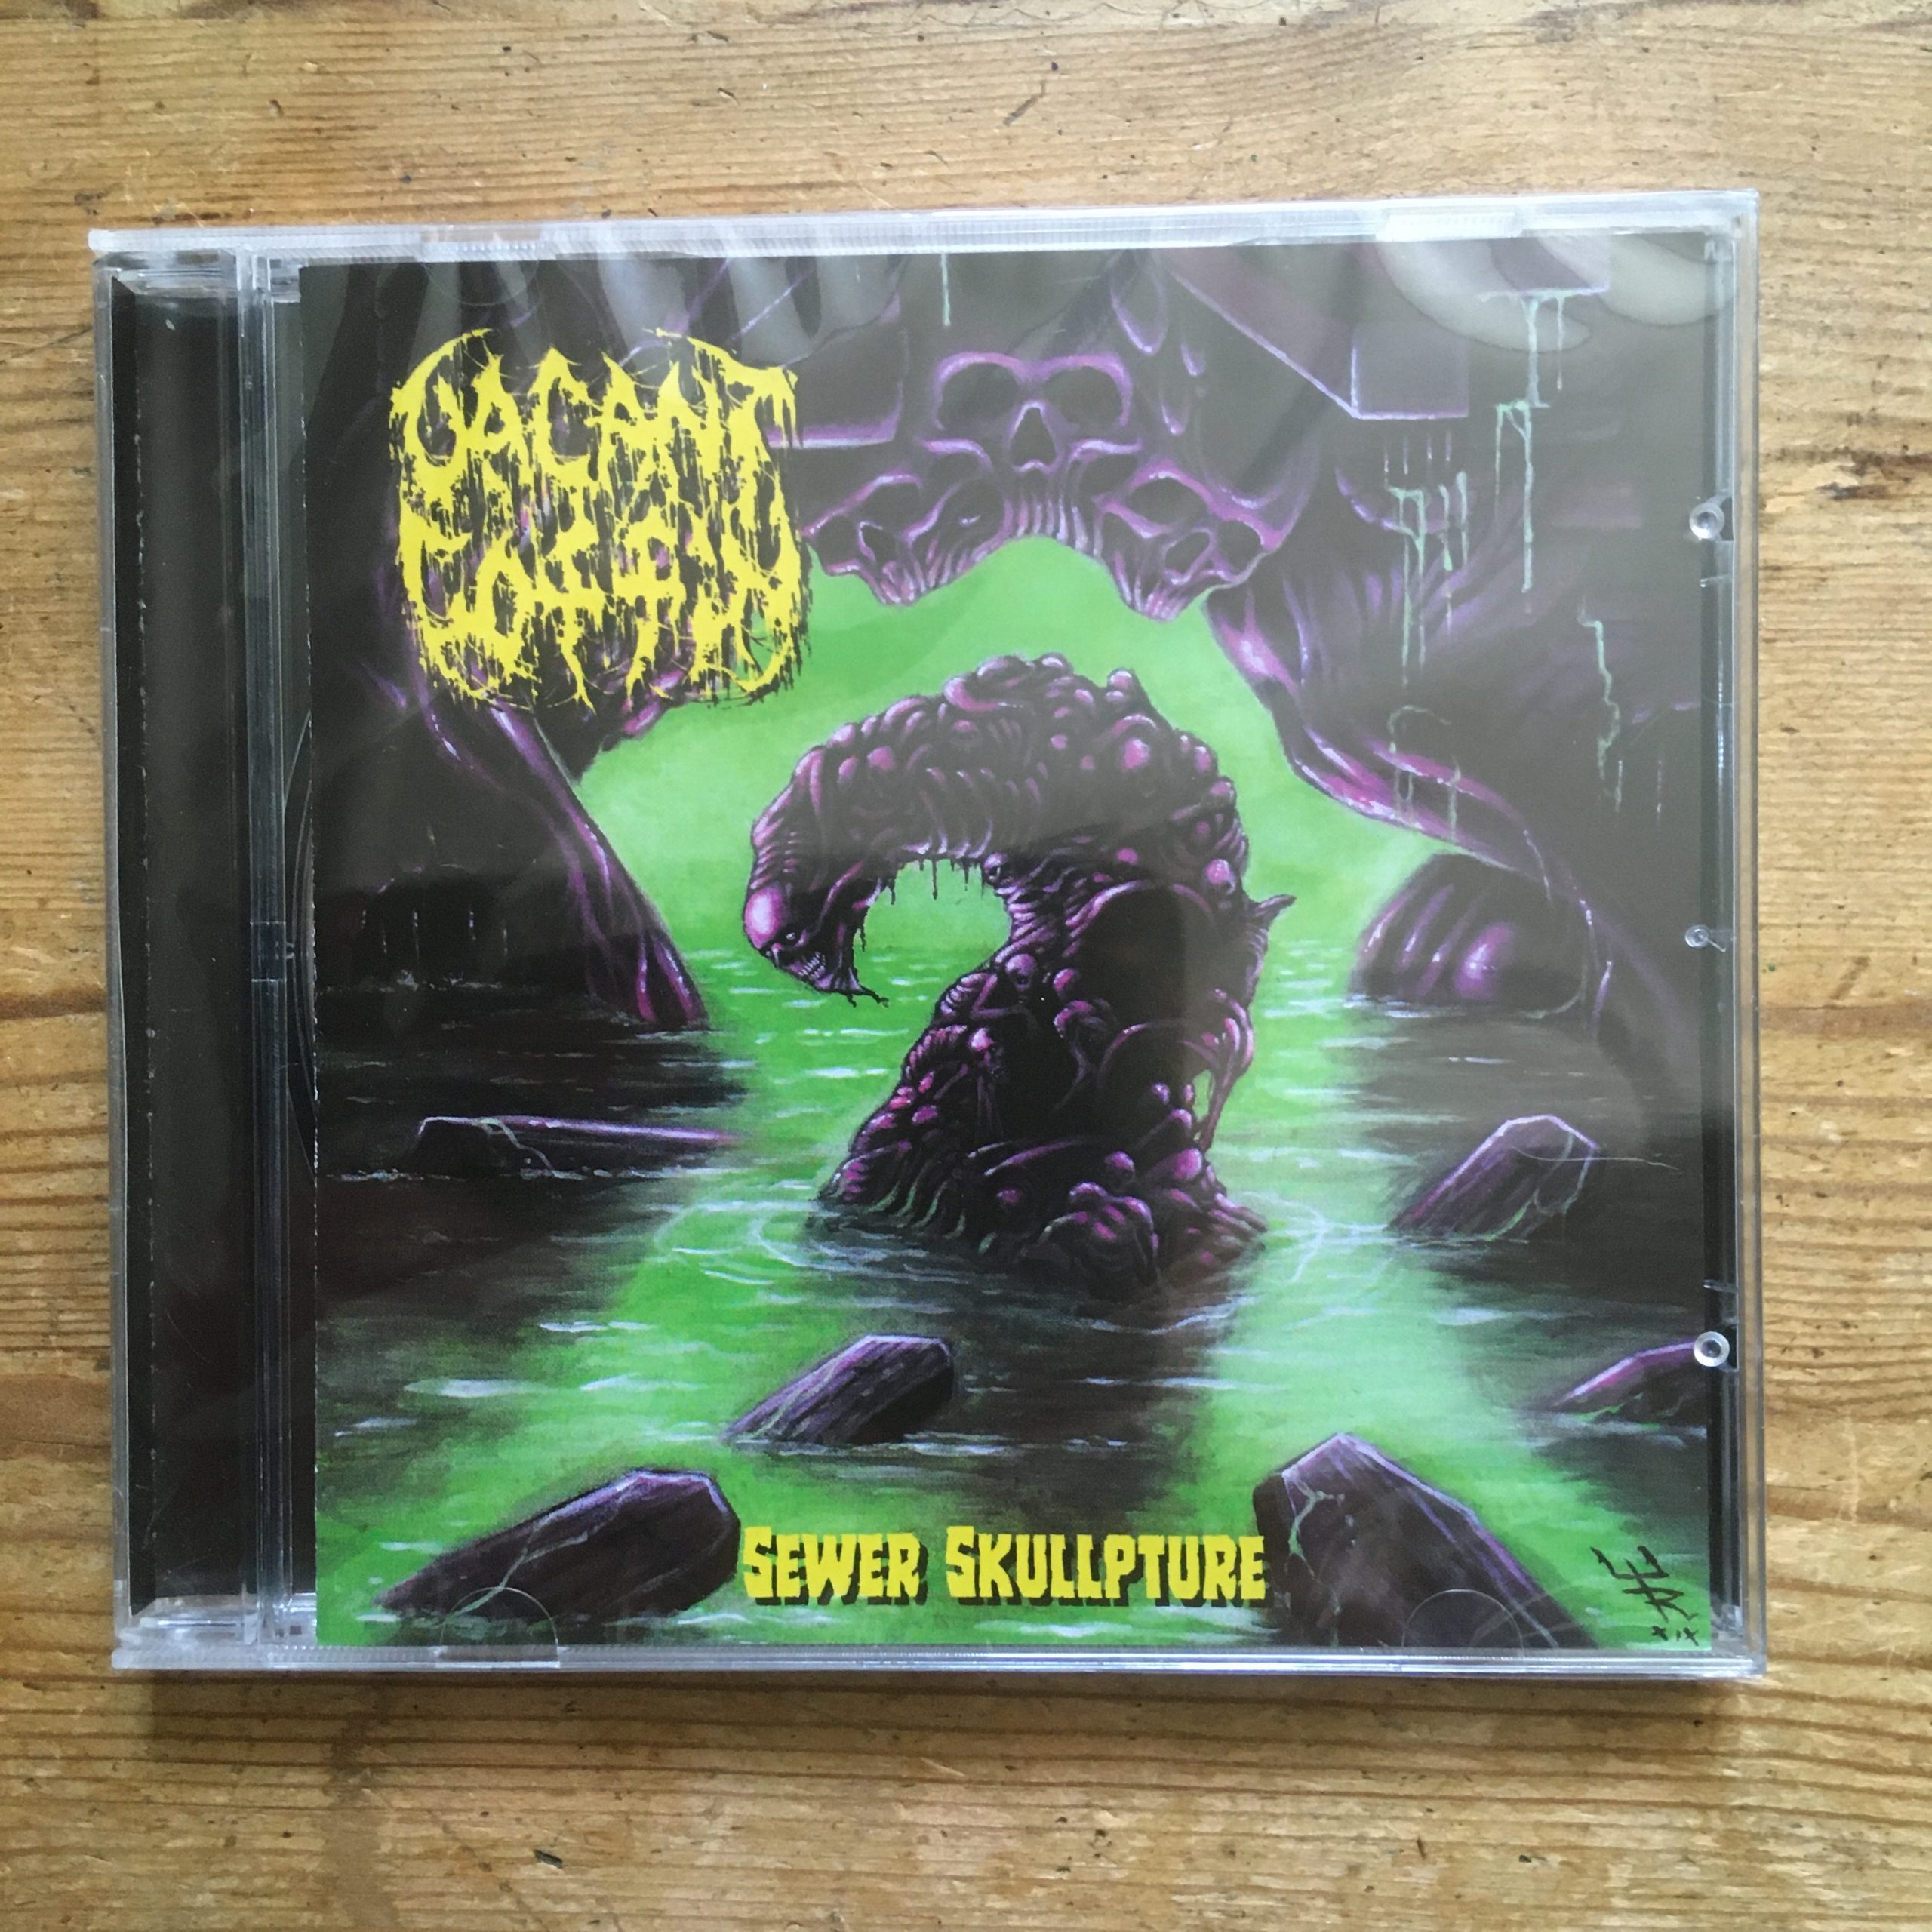 Photo of the Vacant Coffin - "Sewer Skullpture" CD